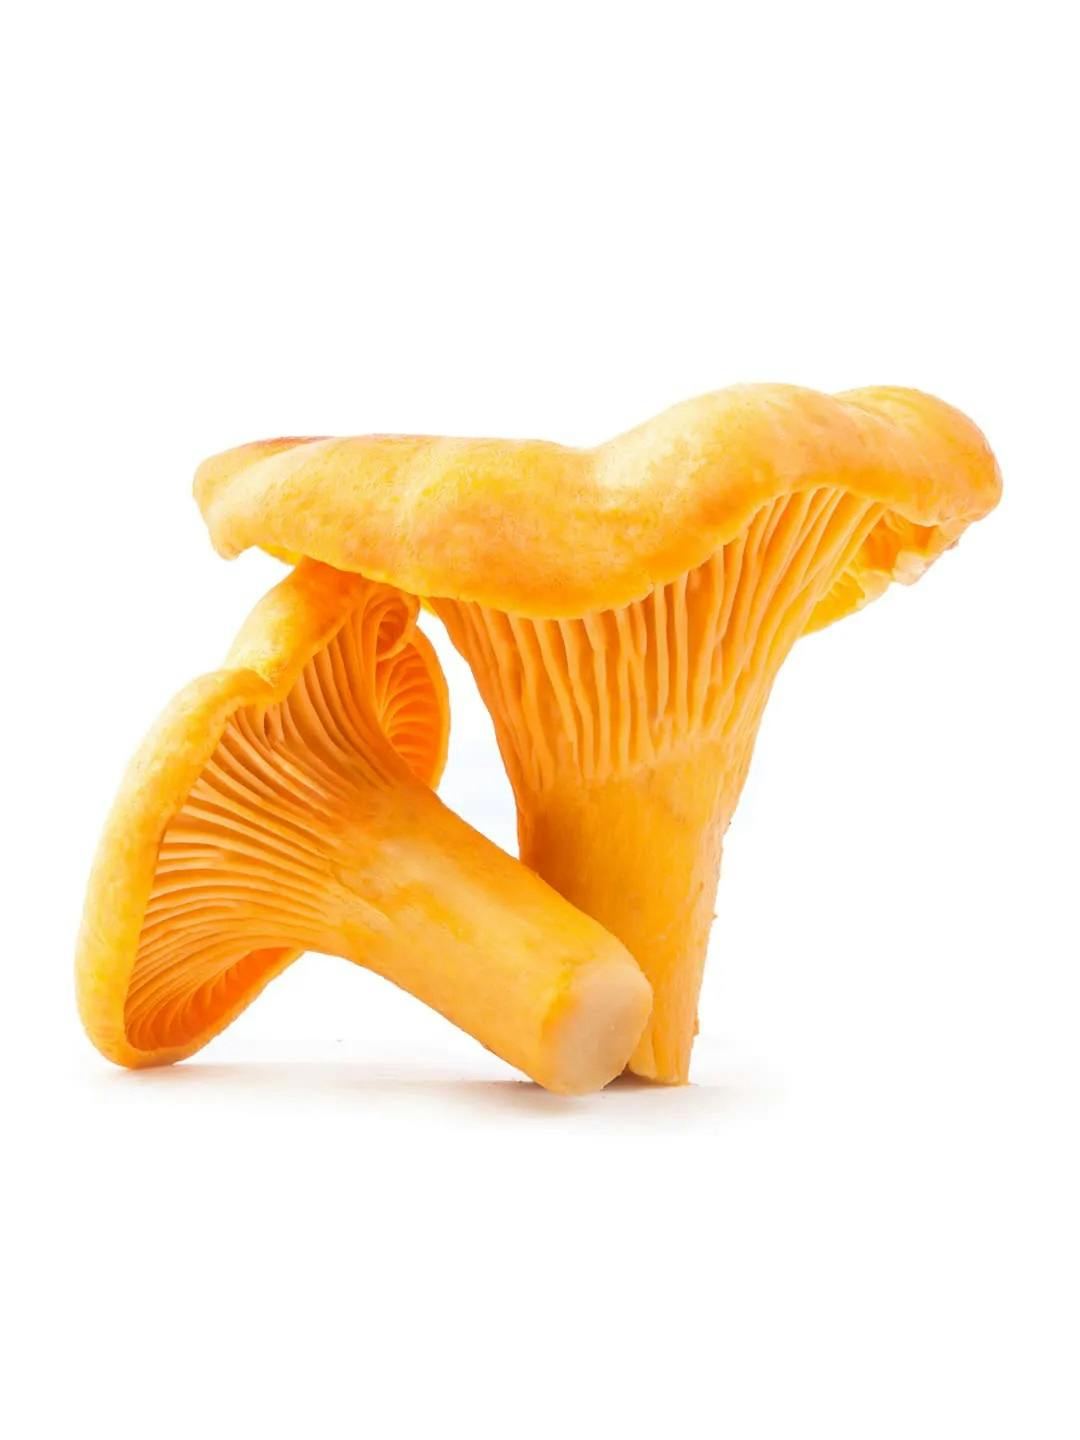 Chanterelle vs. Its Imposters: Identifying Chanterelle Look Alikes